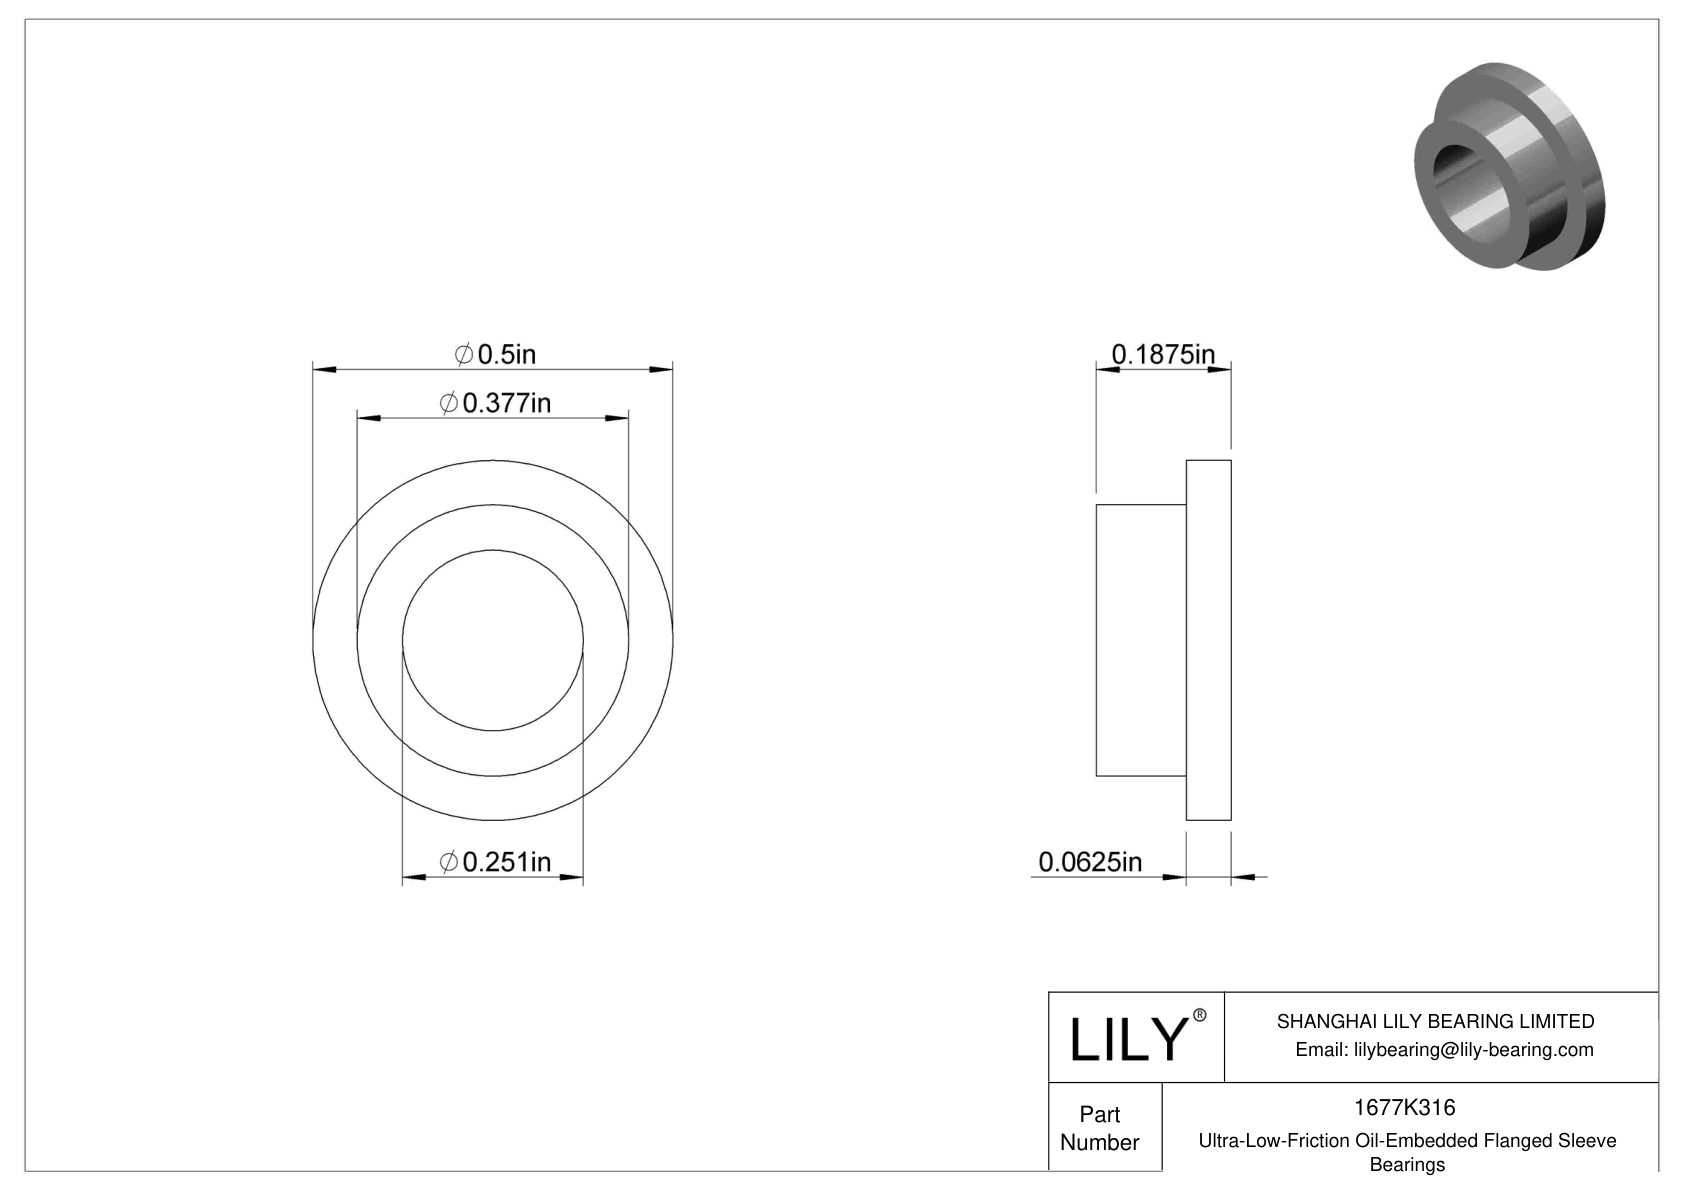 BGHHKDBG Ultra-Low-Friction Oil-Embedded Flanged Sleeve Bearings cad drawing